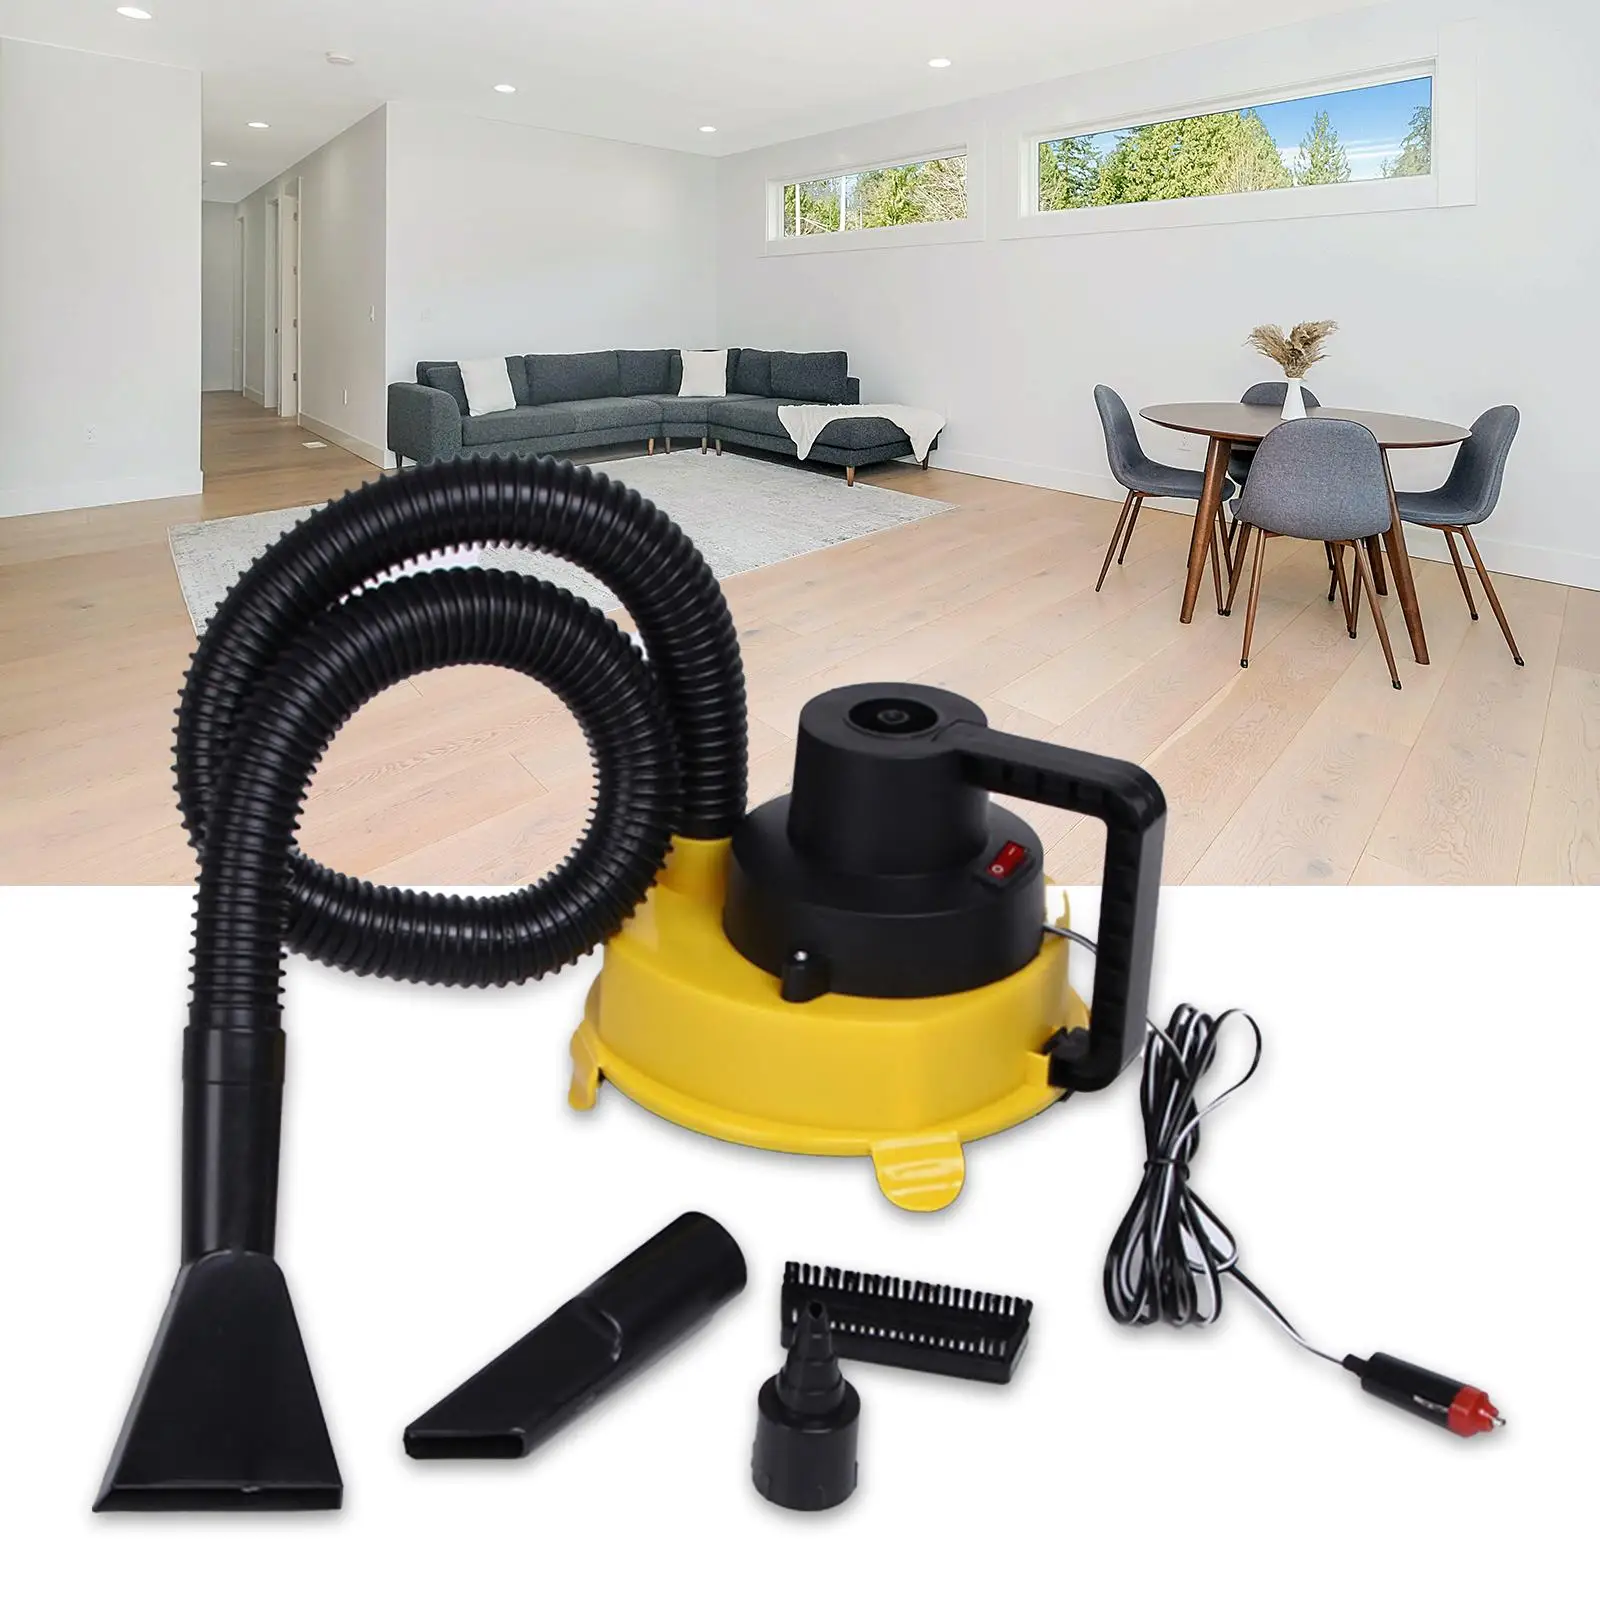 Car Vacuum Cleaner Wet Dry Vacuum Cleaner Washable 12V Lightweight Handheld Duster Dust Buster Auto Vacuum for Camper RV